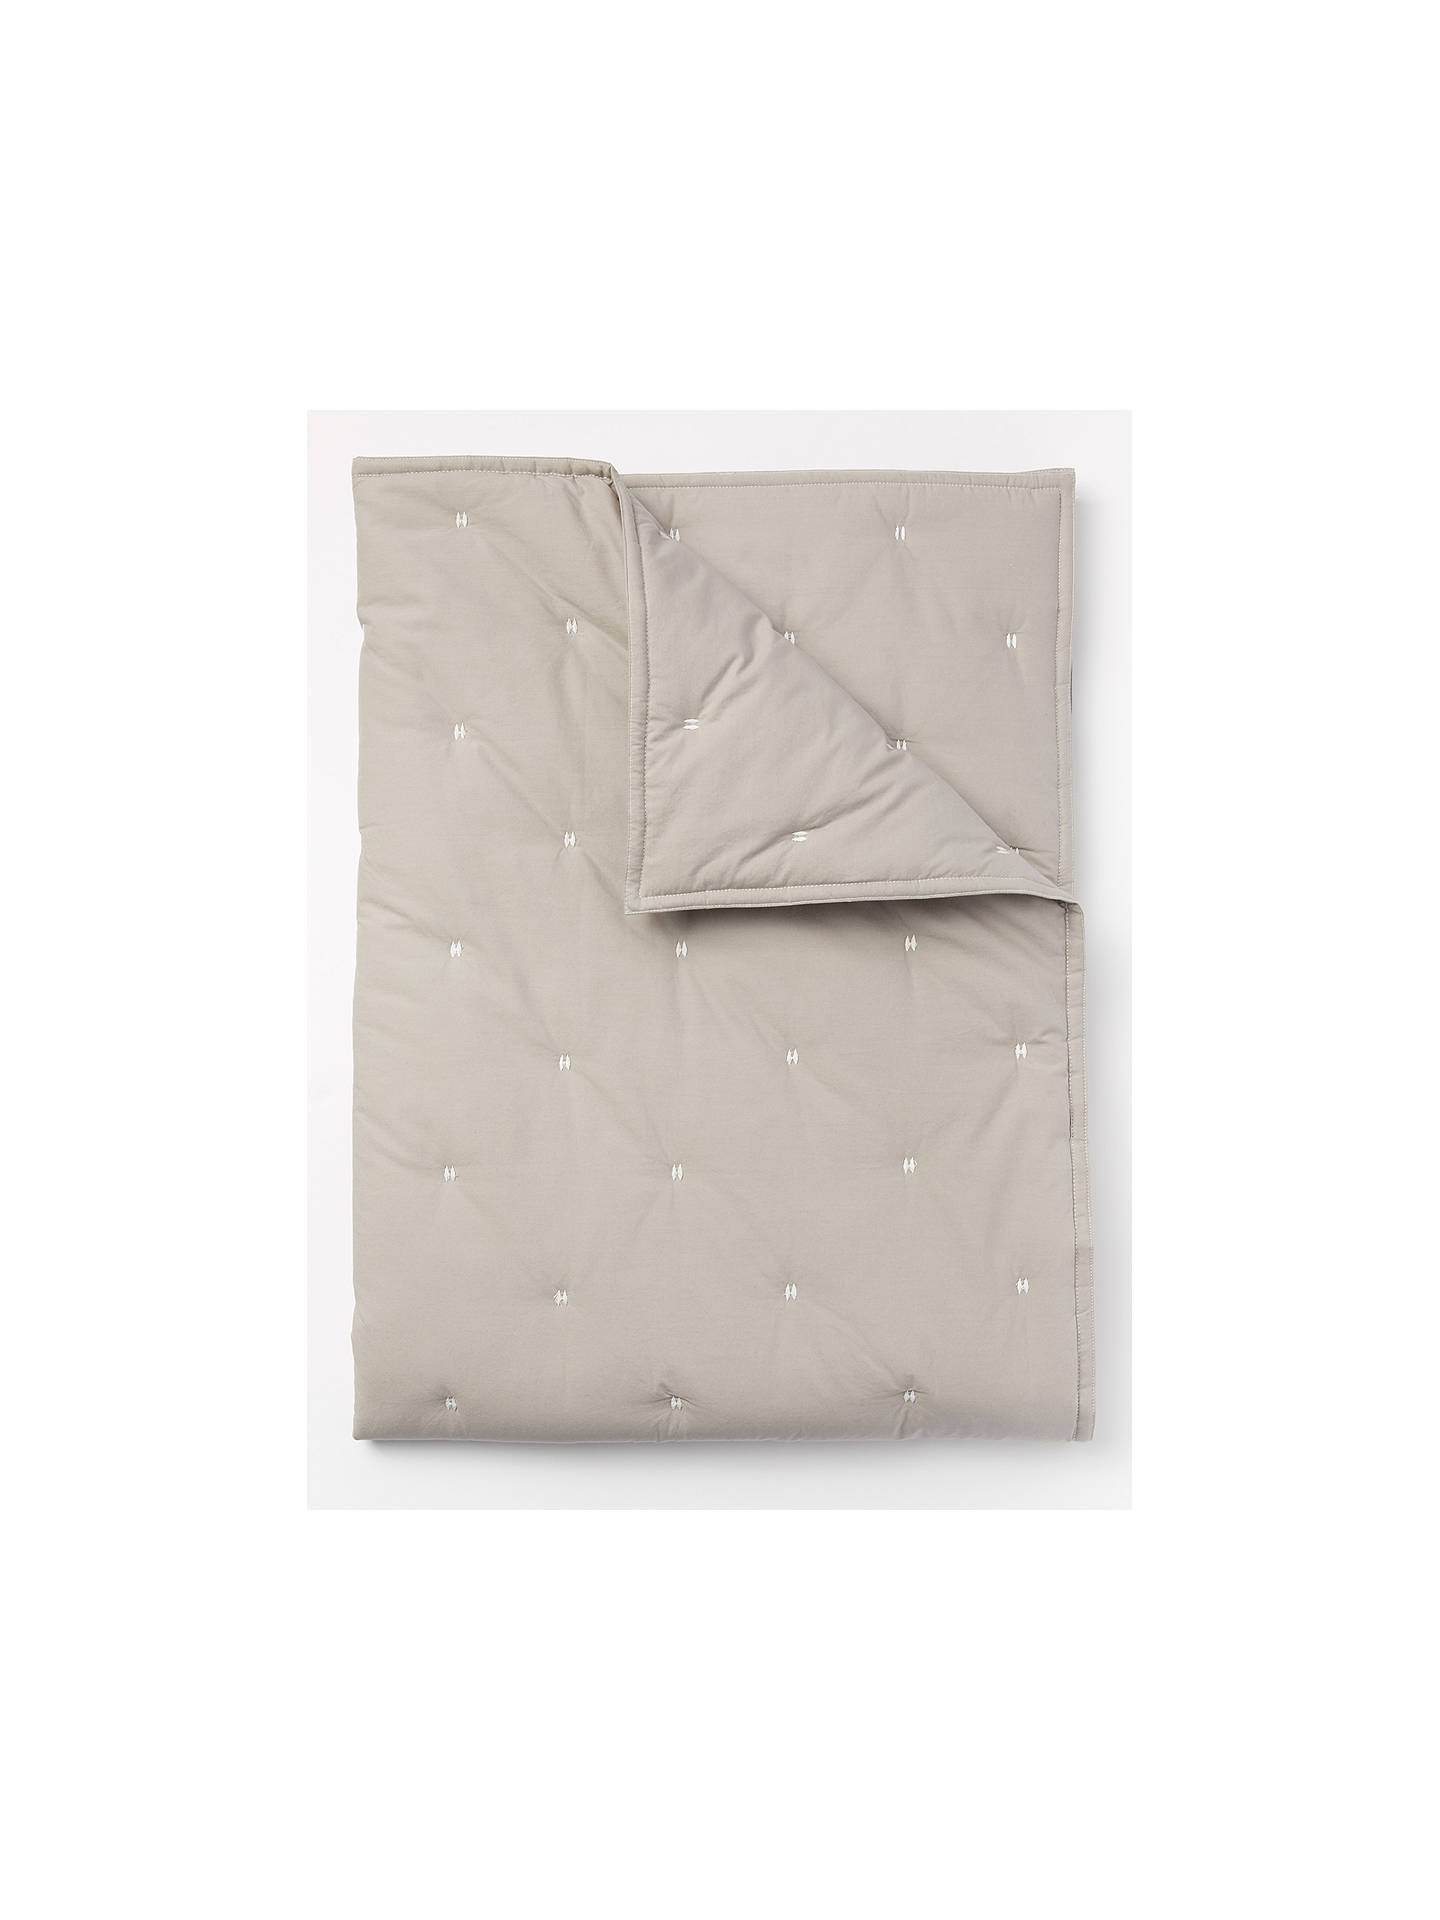 Pottery Barn Kids Organic Cotton Toddler Bed Quilt Silver At John